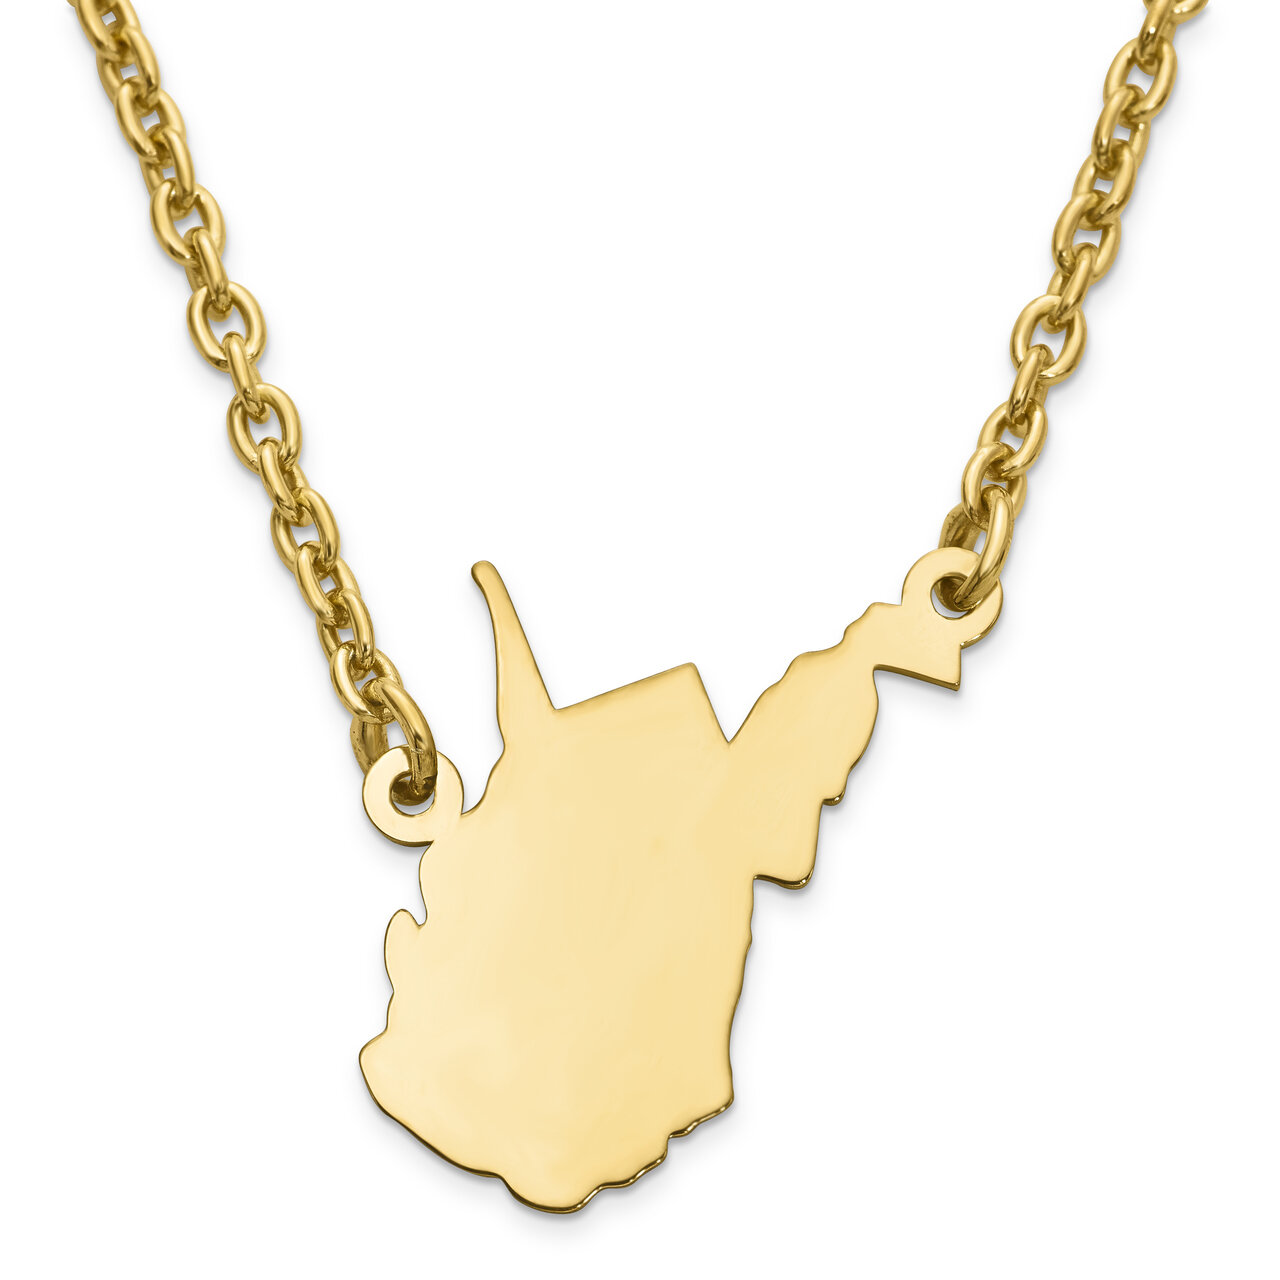 West Virginia State Pendant Necklace with Chain 14k Yellow Gold Engravable XNA706Y-WV